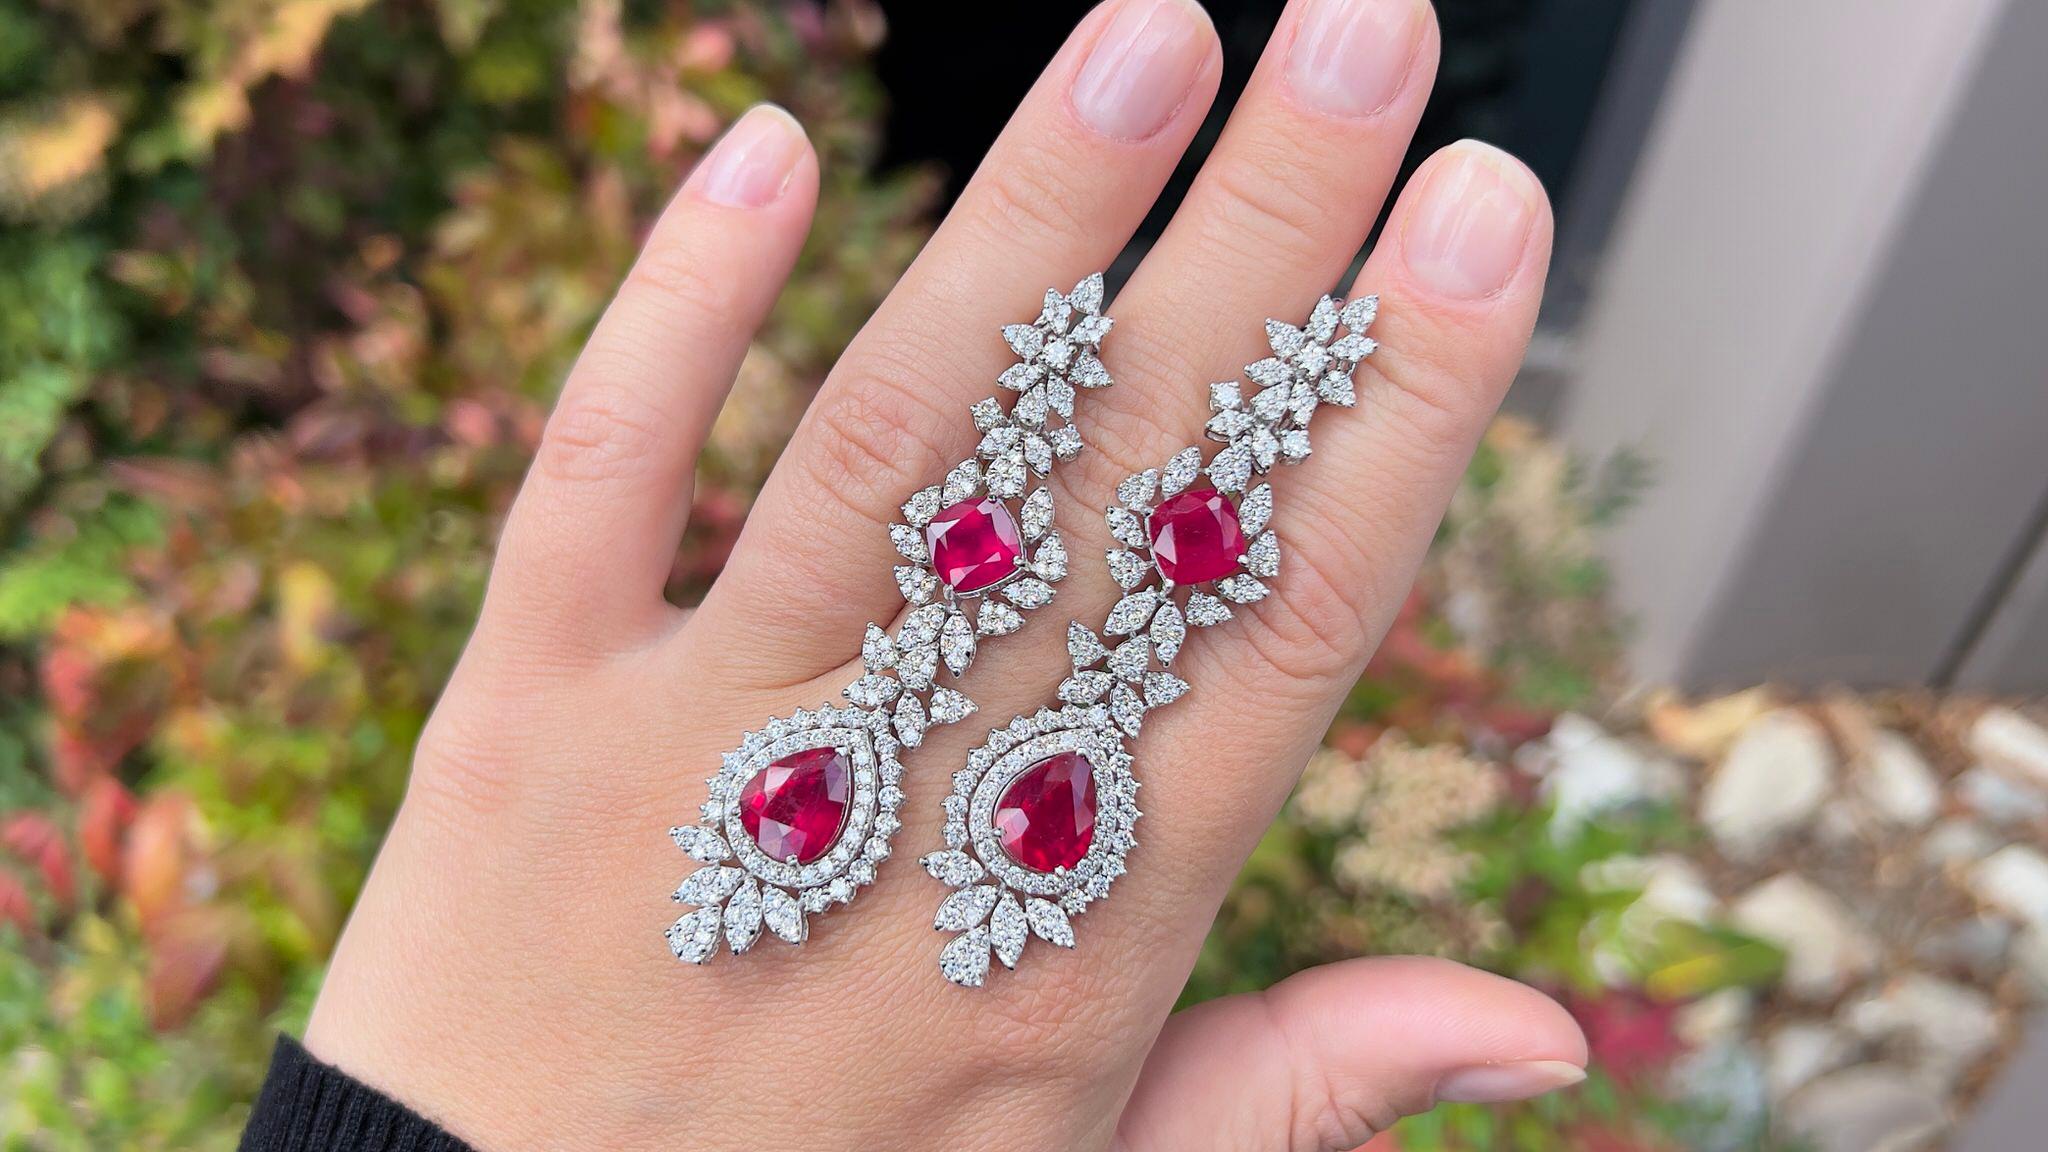 Very Fine Rubies = 13.63 Carats
Diamonds = 5.25 Carats
(Color: F, Clarity: VS)
Metal: 18K Gold
Length: 3 Inches